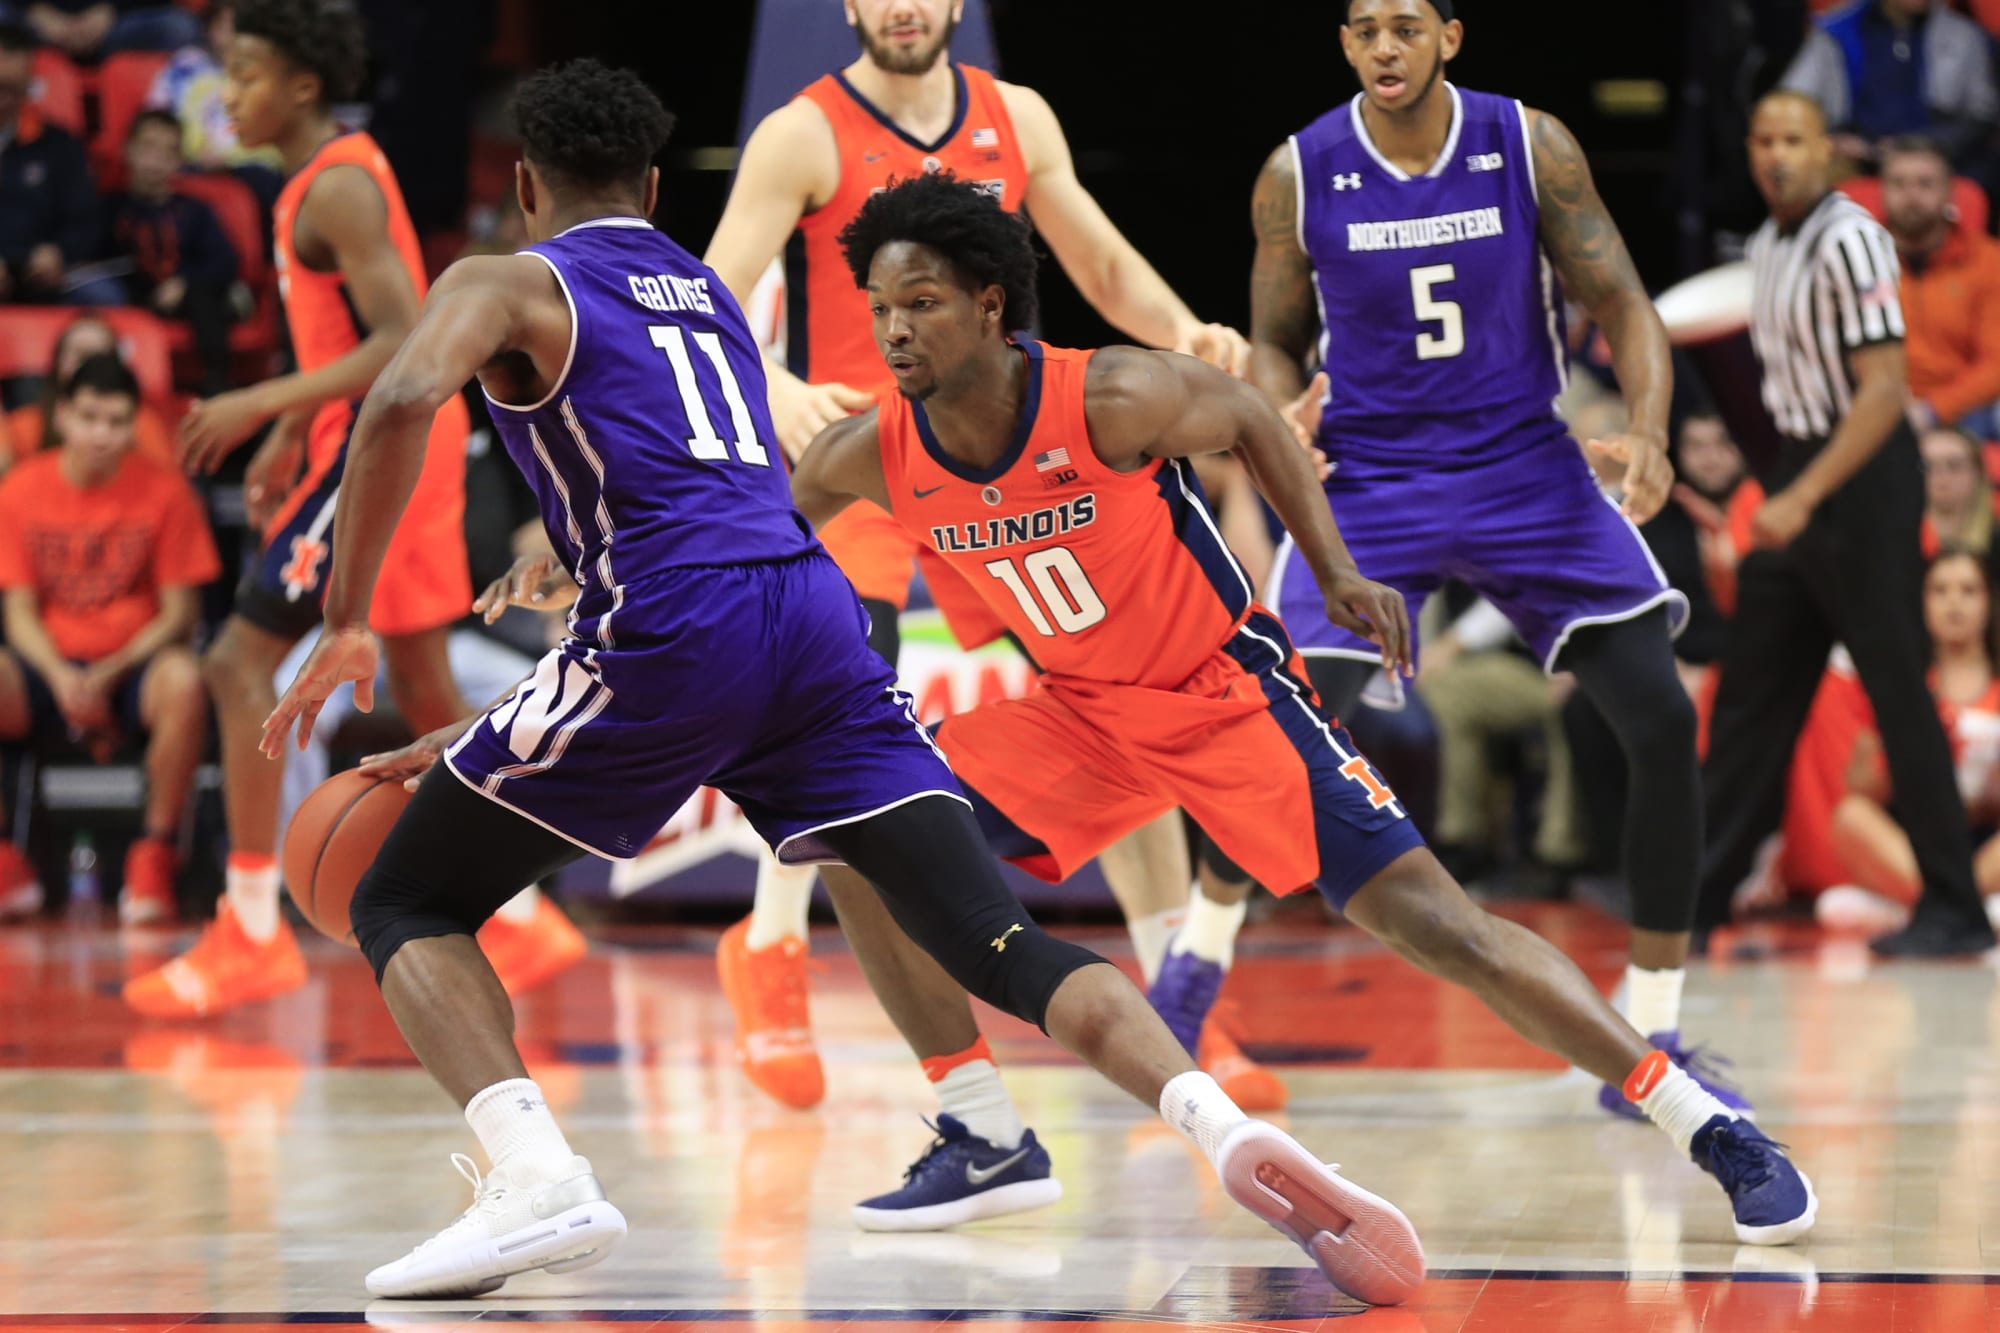 Illinois Basketball: 5 observations from the Illini win over